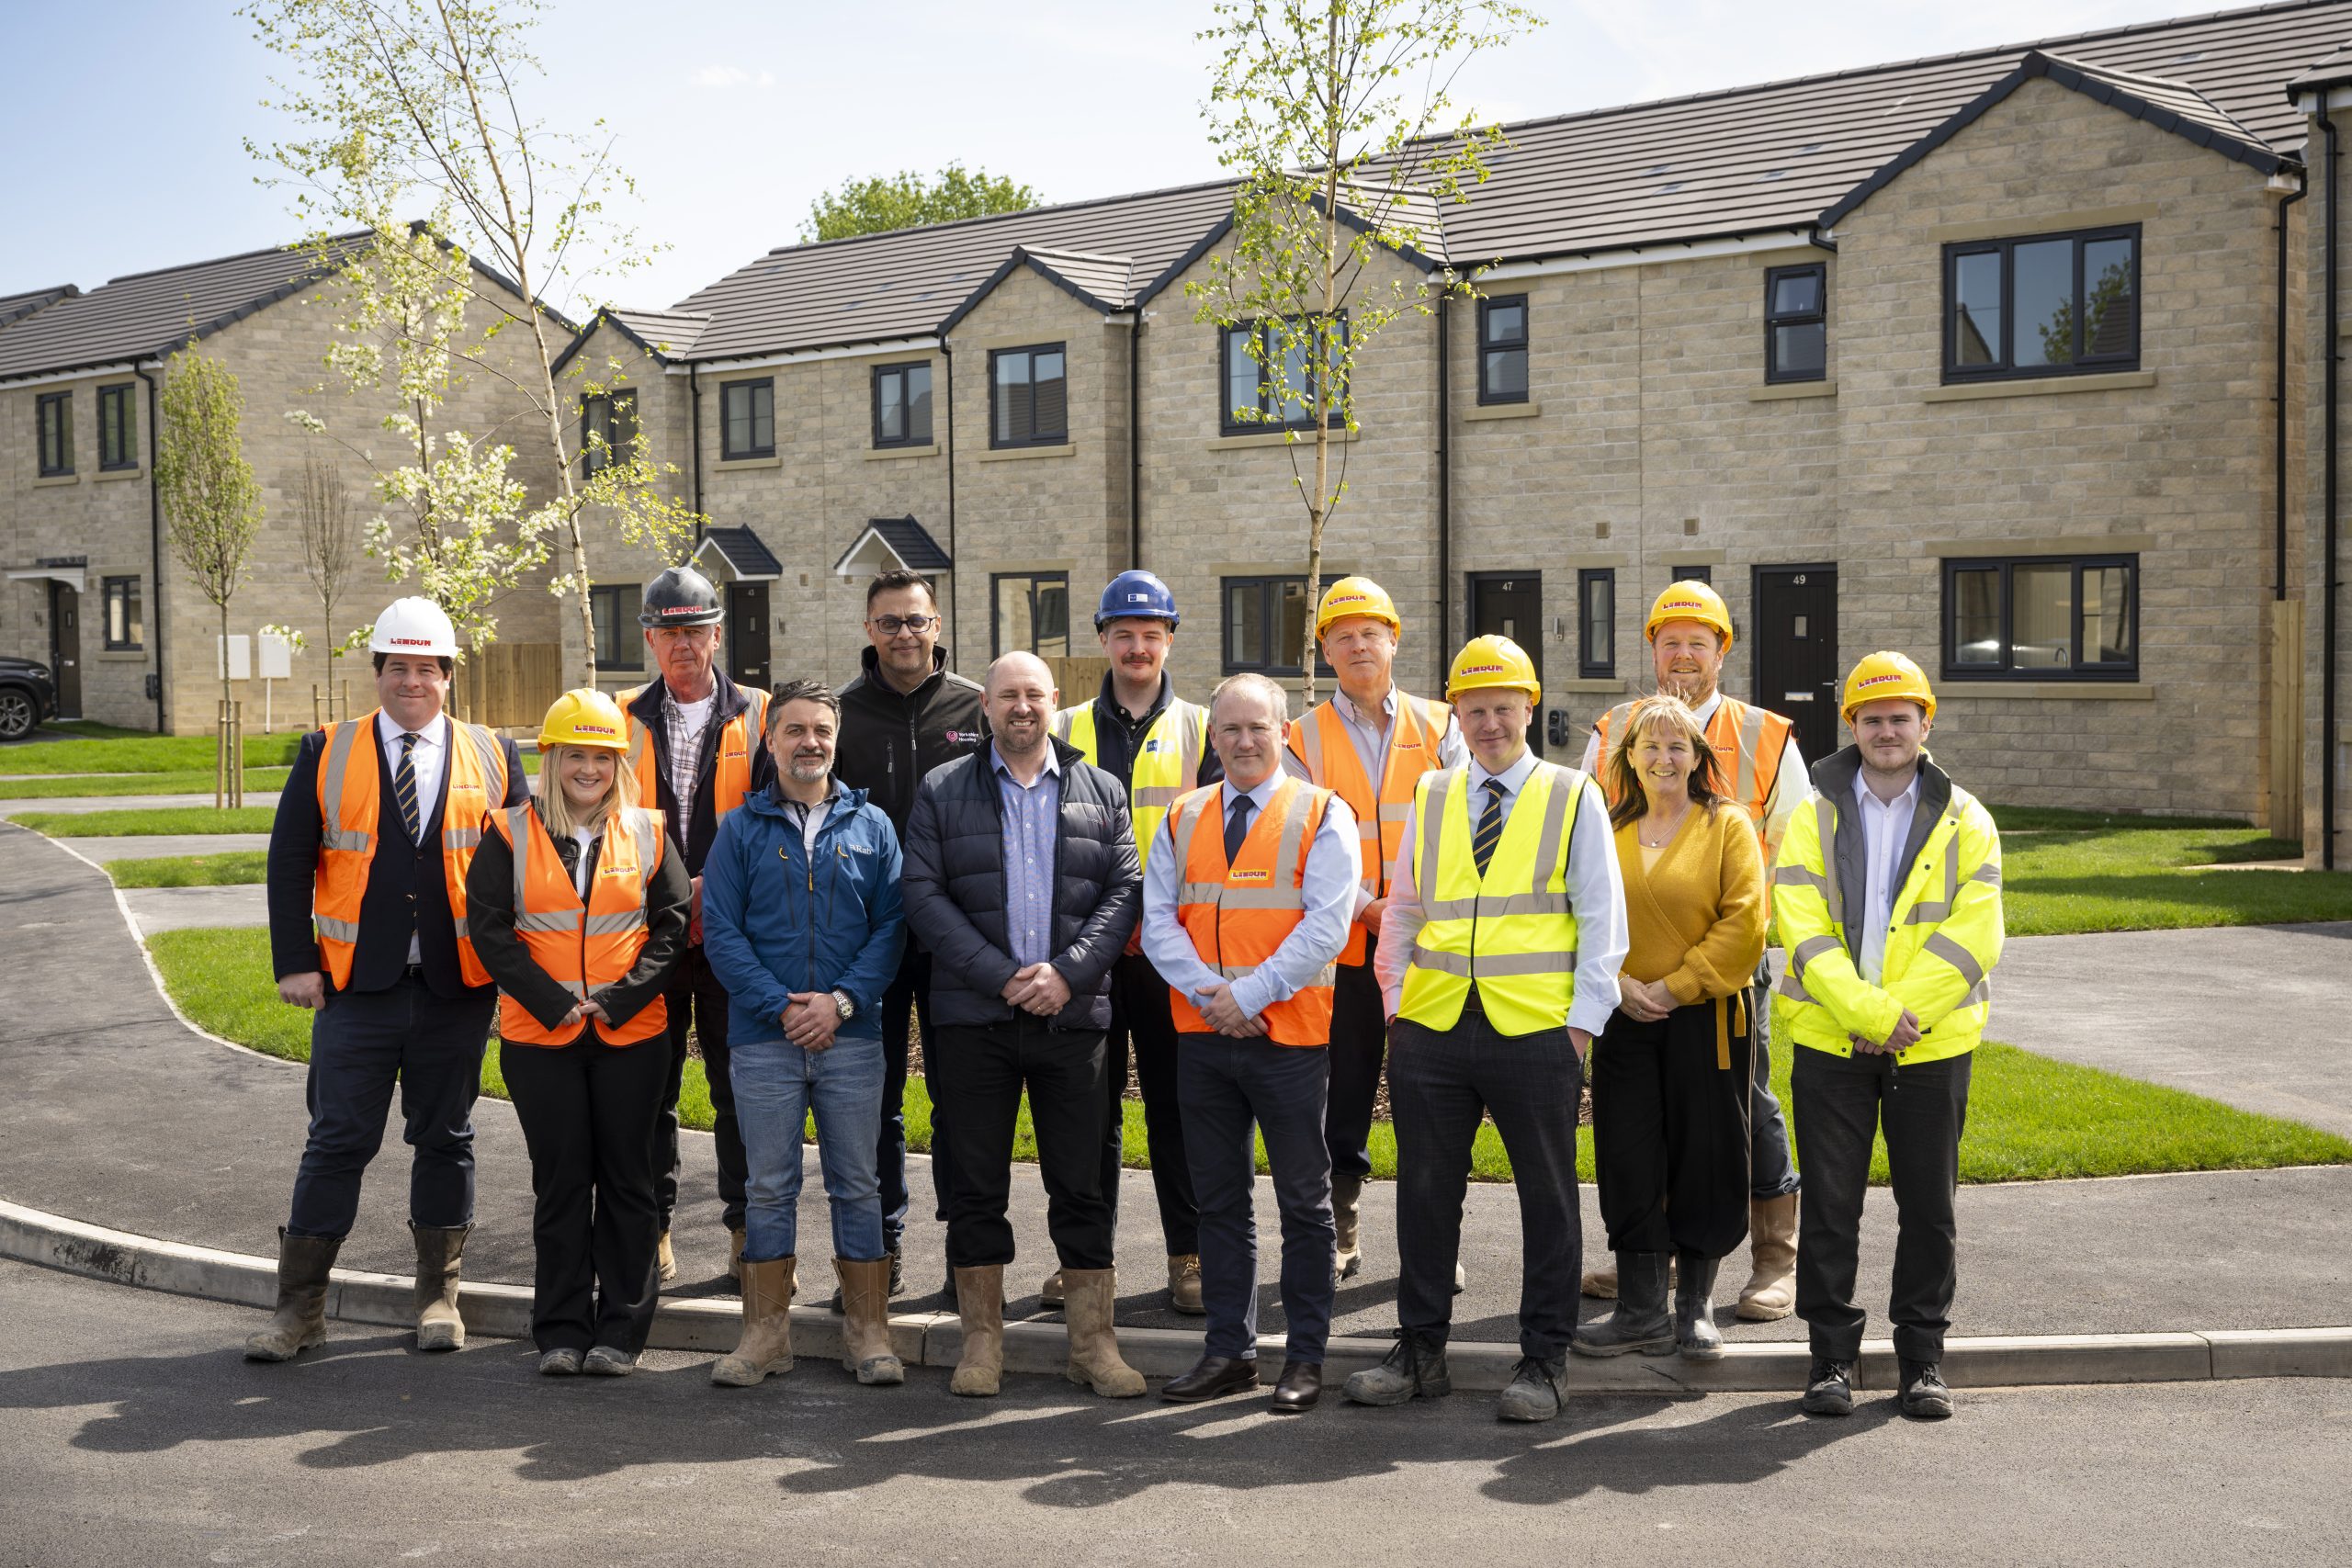 Lindum completes the last phase of 156 affordable homes, easing the housing crisis